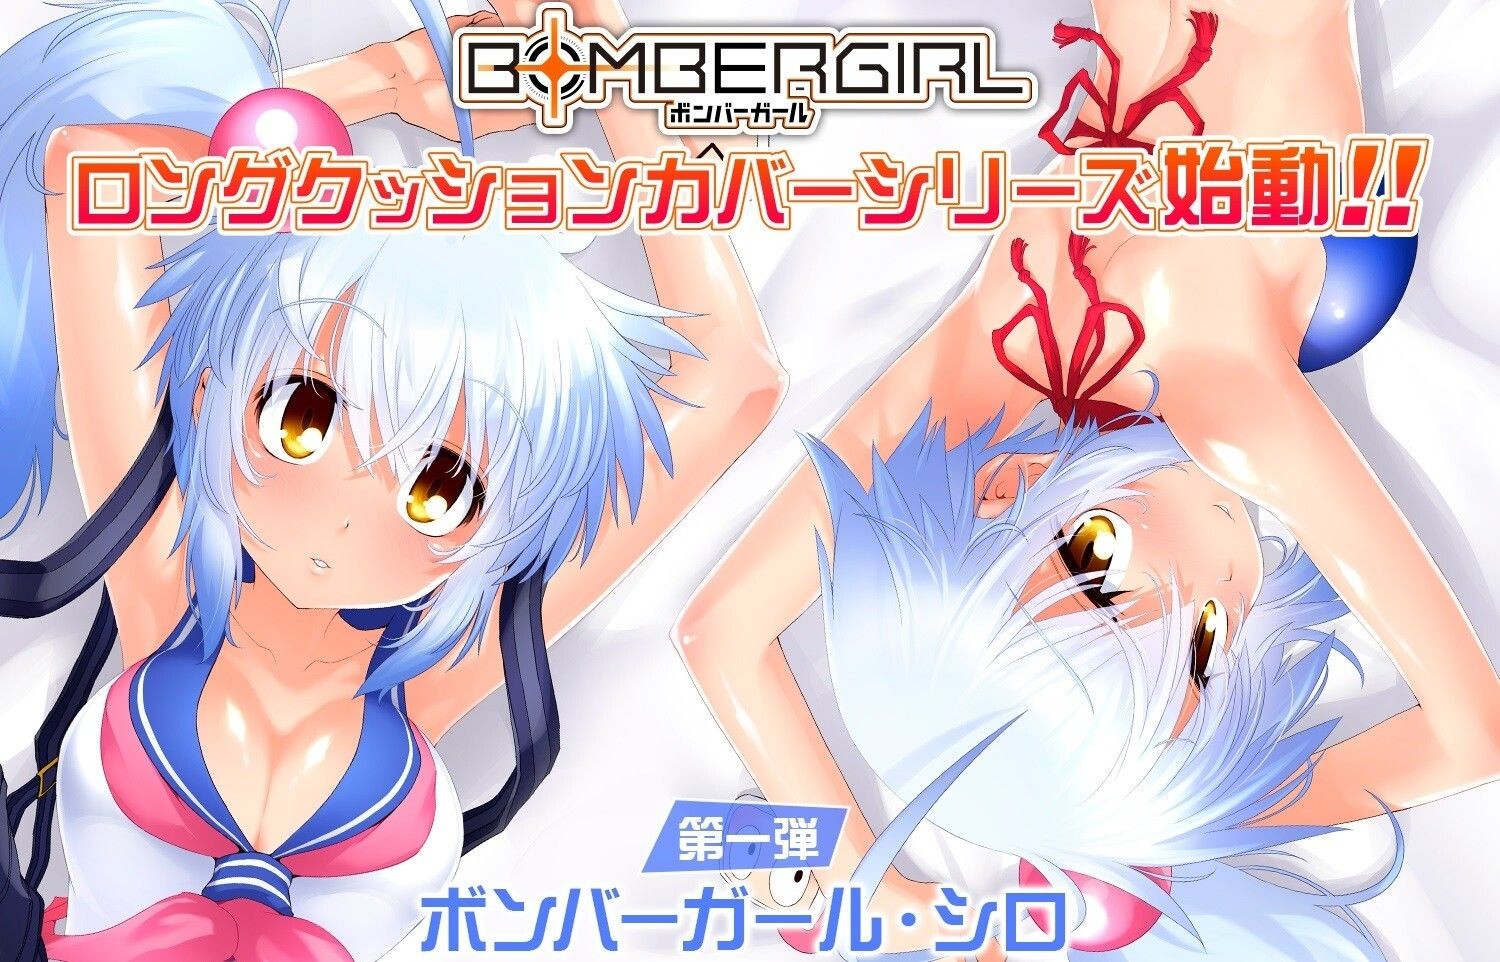 Assfingering [Bomber Girl] Shiro's Erotic Ass And Clothes Of Erotic Swimsuit Is A Cuddle Of Erotic Figure That Was Released! Ex Girlfriends